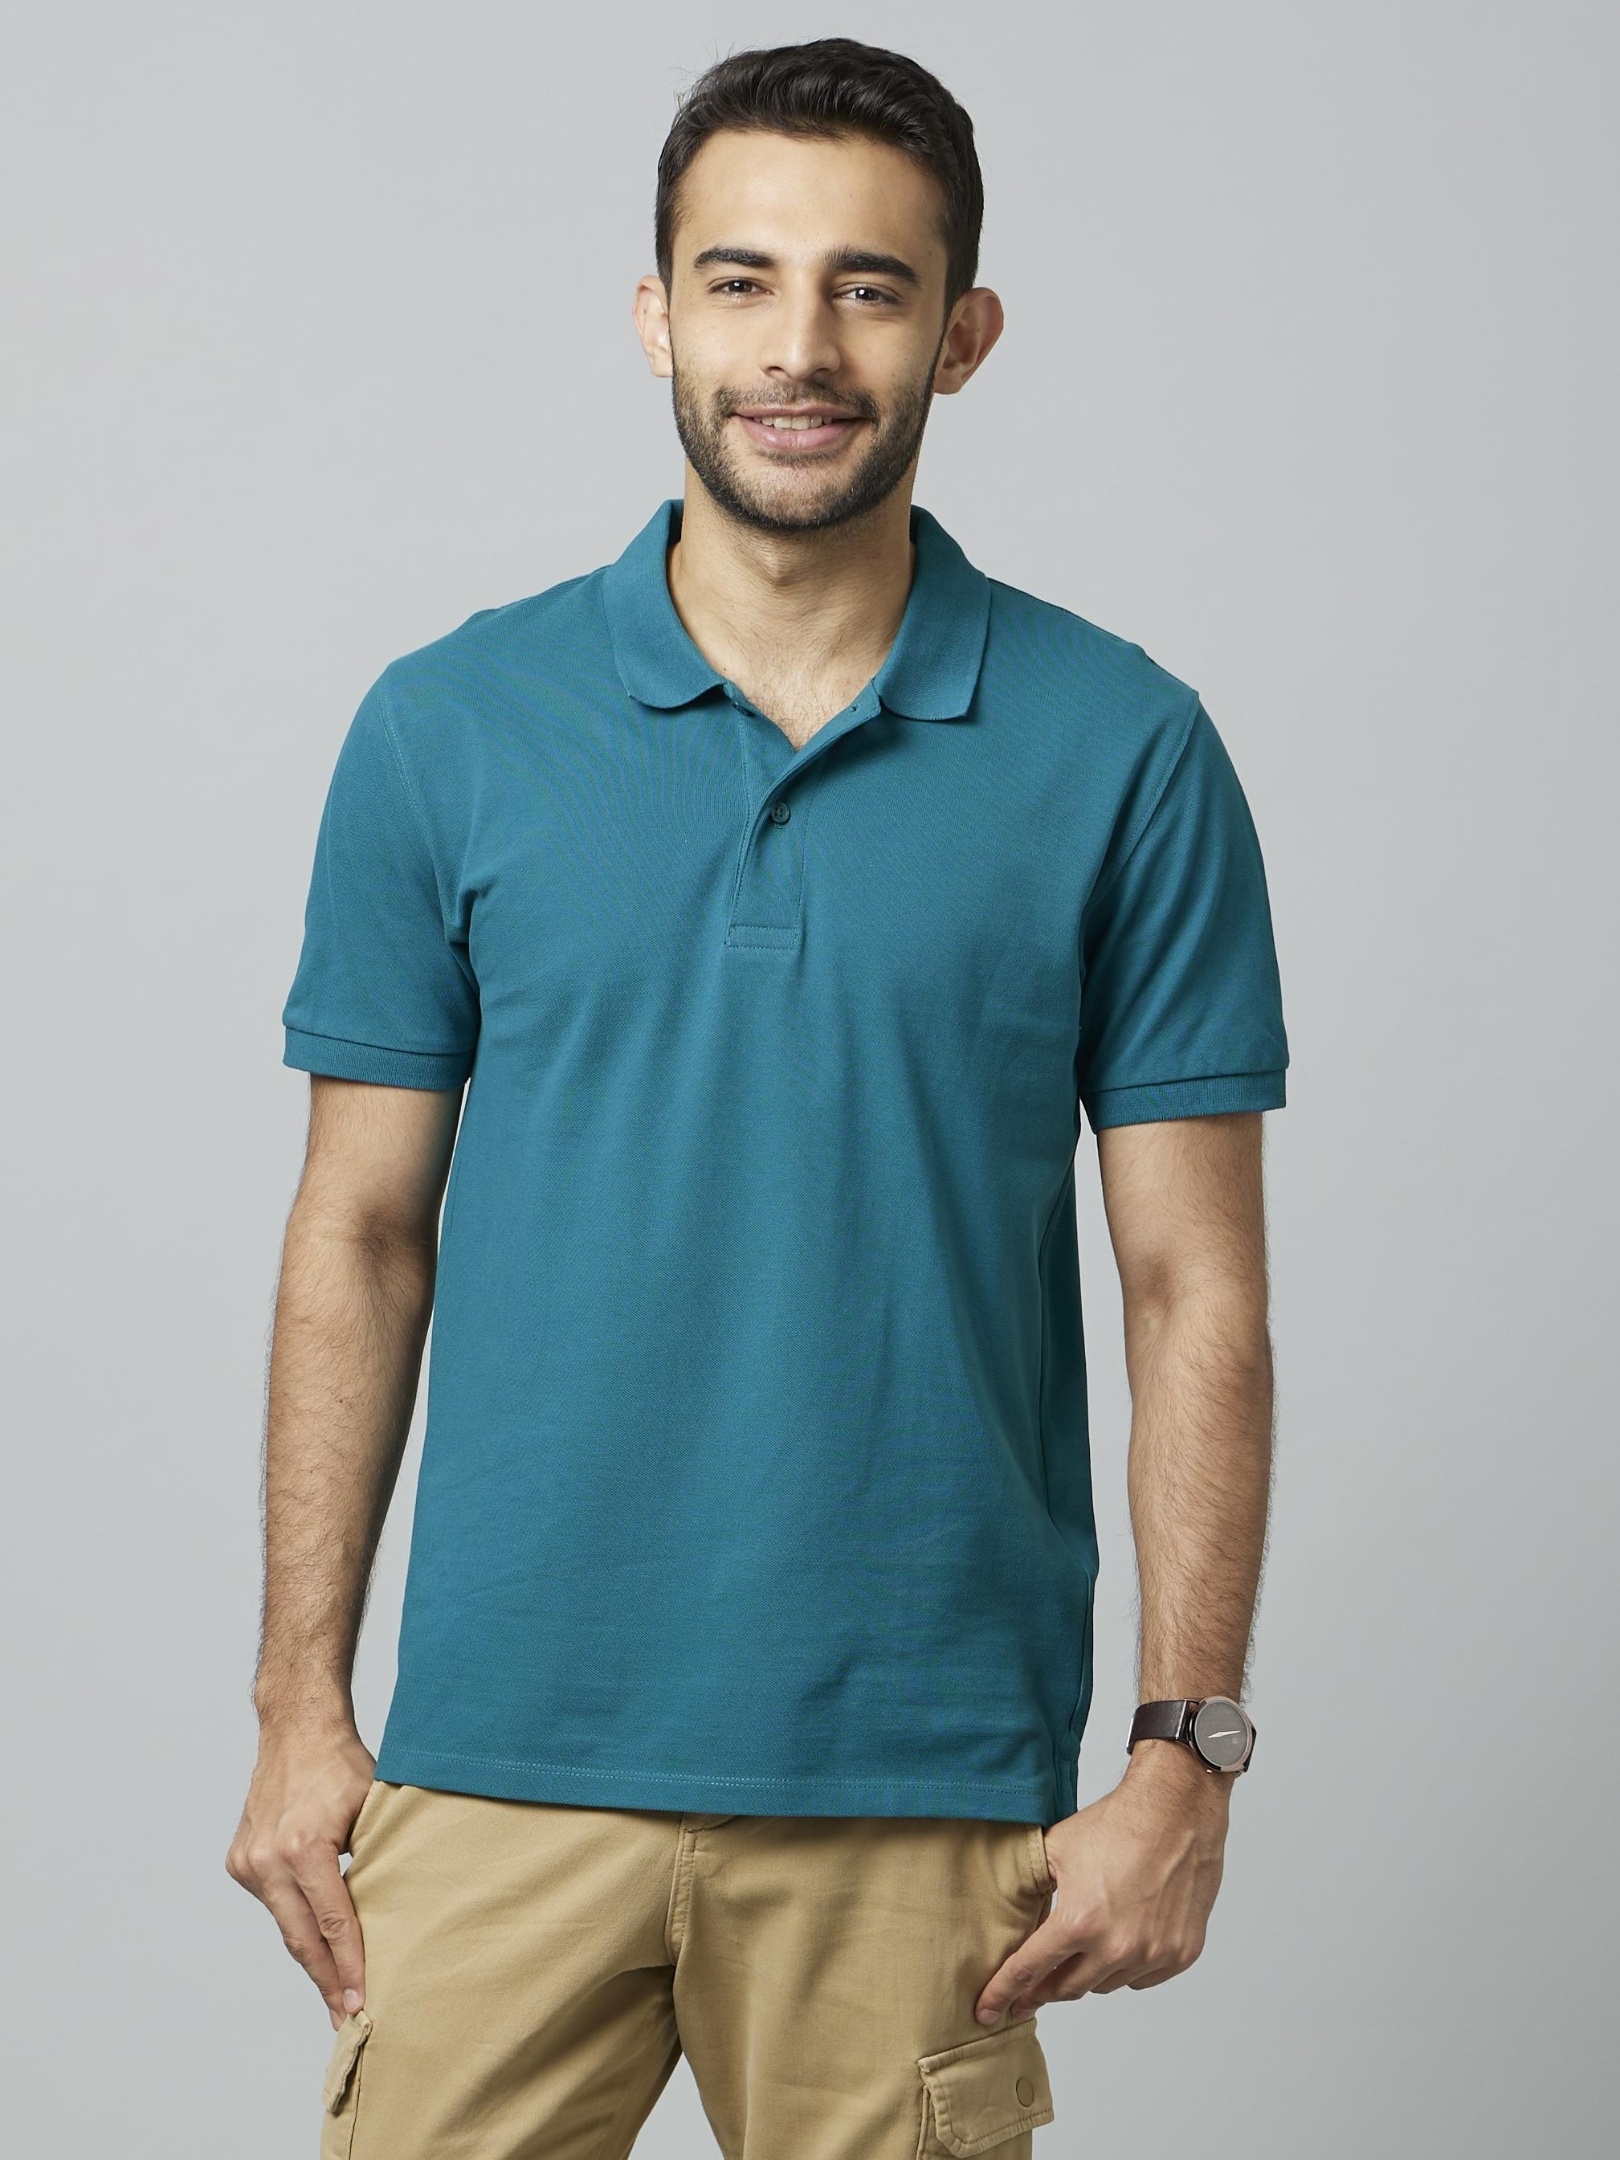 Celio Solid Teal Short Sleeves Polo